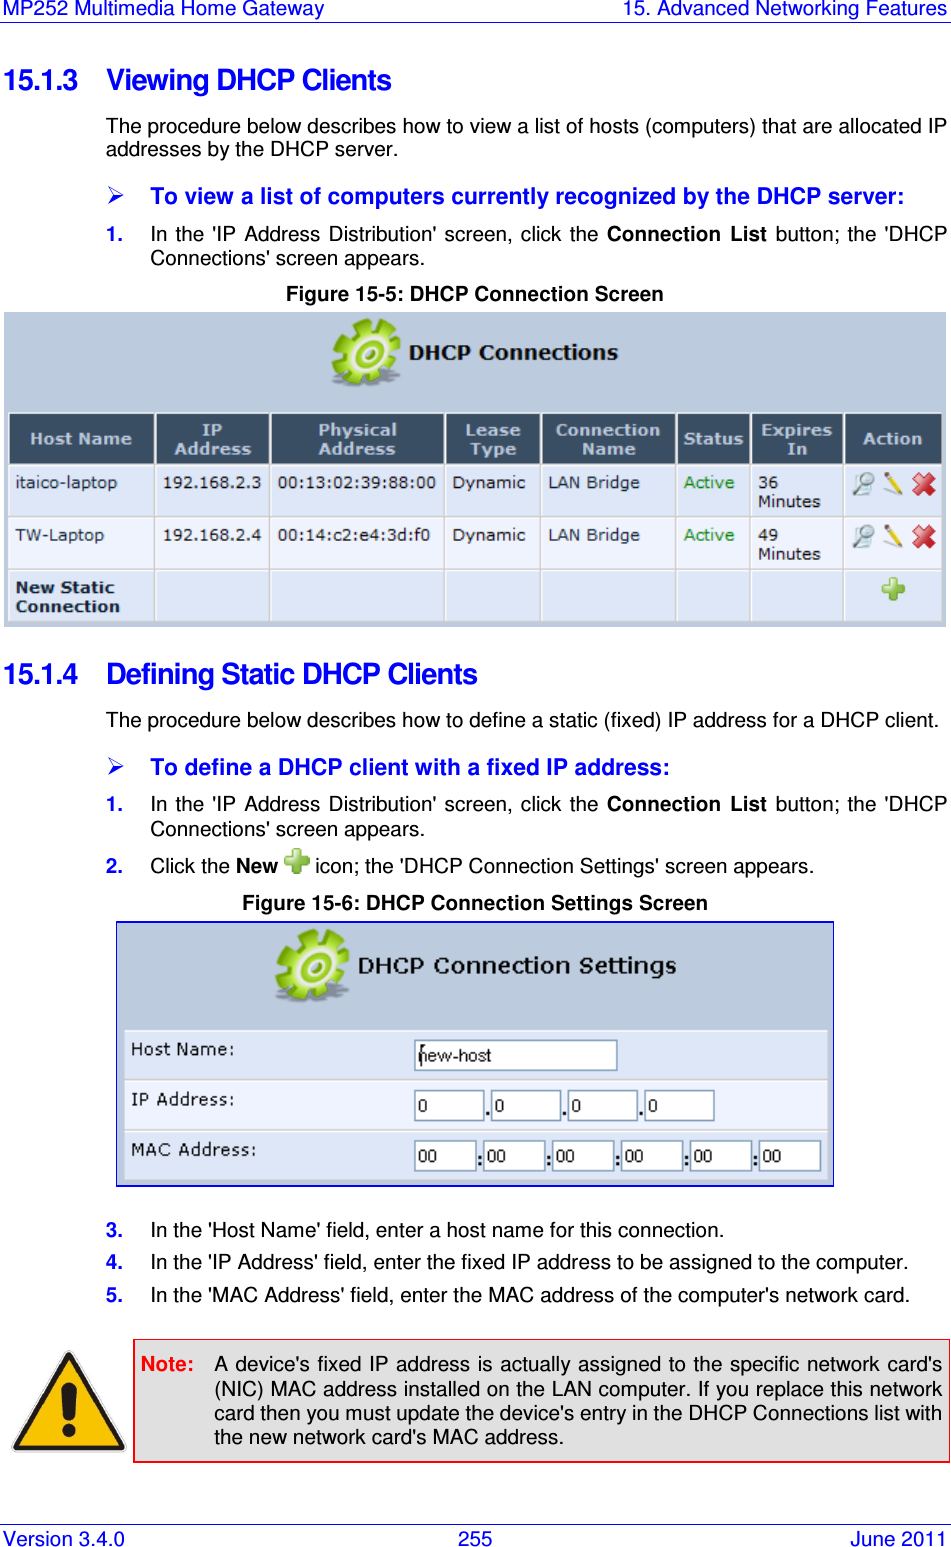 MP252 Multimedia Home Gateway  15. Advanced Networking Features Version 3.4.0  255  June 2011 15.1.3  Viewing DHCP Clients The procedure below describes how to view a list of hosts (computers) that are allocated IP addresses by the DHCP server.   To view a list of computers currently recognized by the DHCP server: 1.  In the  &apos;IP Address  Distribution&apos; screen, click the  Connection  List  button; the  &apos;DHCP Connections&apos; screen appears. Figure 15-5: DHCP Connection Screen   15.1.4  Defining Static DHCP Clients The procedure below describes how to define a static (fixed) IP address for a DHCP client.  To define a DHCP client with a fixed IP address: 1.  In the  &apos;IP Address  Distribution&apos; screen, click the  Connection  List  button; the  &apos;DHCP Connections&apos; screen appears. 2.  Click the New   icon; the &apos;DHCP Connection Settings&apos; screen appears. Figure 15-6: DHCP Connection Settings Screen  3.  In the &apos;Host Name&apos; field, enter a host name for this connection. 4.  In the &apos;IP Address&apos; field, enter the fixed IP address to be assigned to the computer. 5.  In the &apos;MAC Address&apos; field, enter the MAC address of the computer&apos;s network card.   Note:  A device&apos;s fixed IP address is actually assigned to the specific network card&apos;s (NIC) MAC address installed on the LAN computer. If you replace this network card then you must update the device&apos;s entry in the DHCP Connections list with the new network card&apos;s MAC address.  